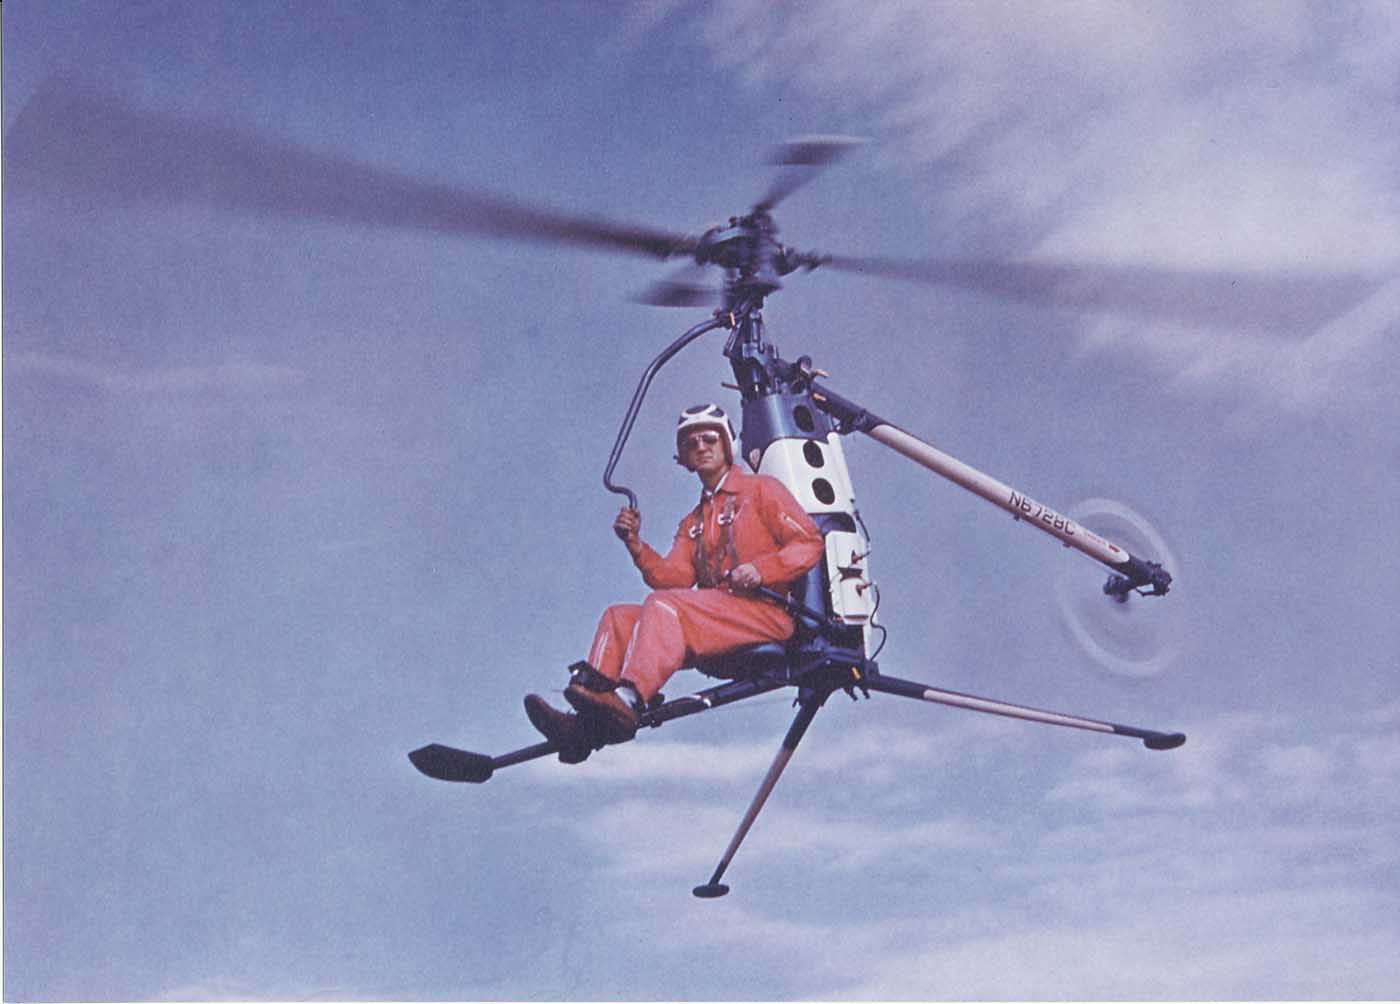 The Hiller Rotorcycle pre-production prototype in flight. Here, it is flown by Hiller’s chief pilot, Richard Peck. Hiller/Jeff Evans Collection Photo